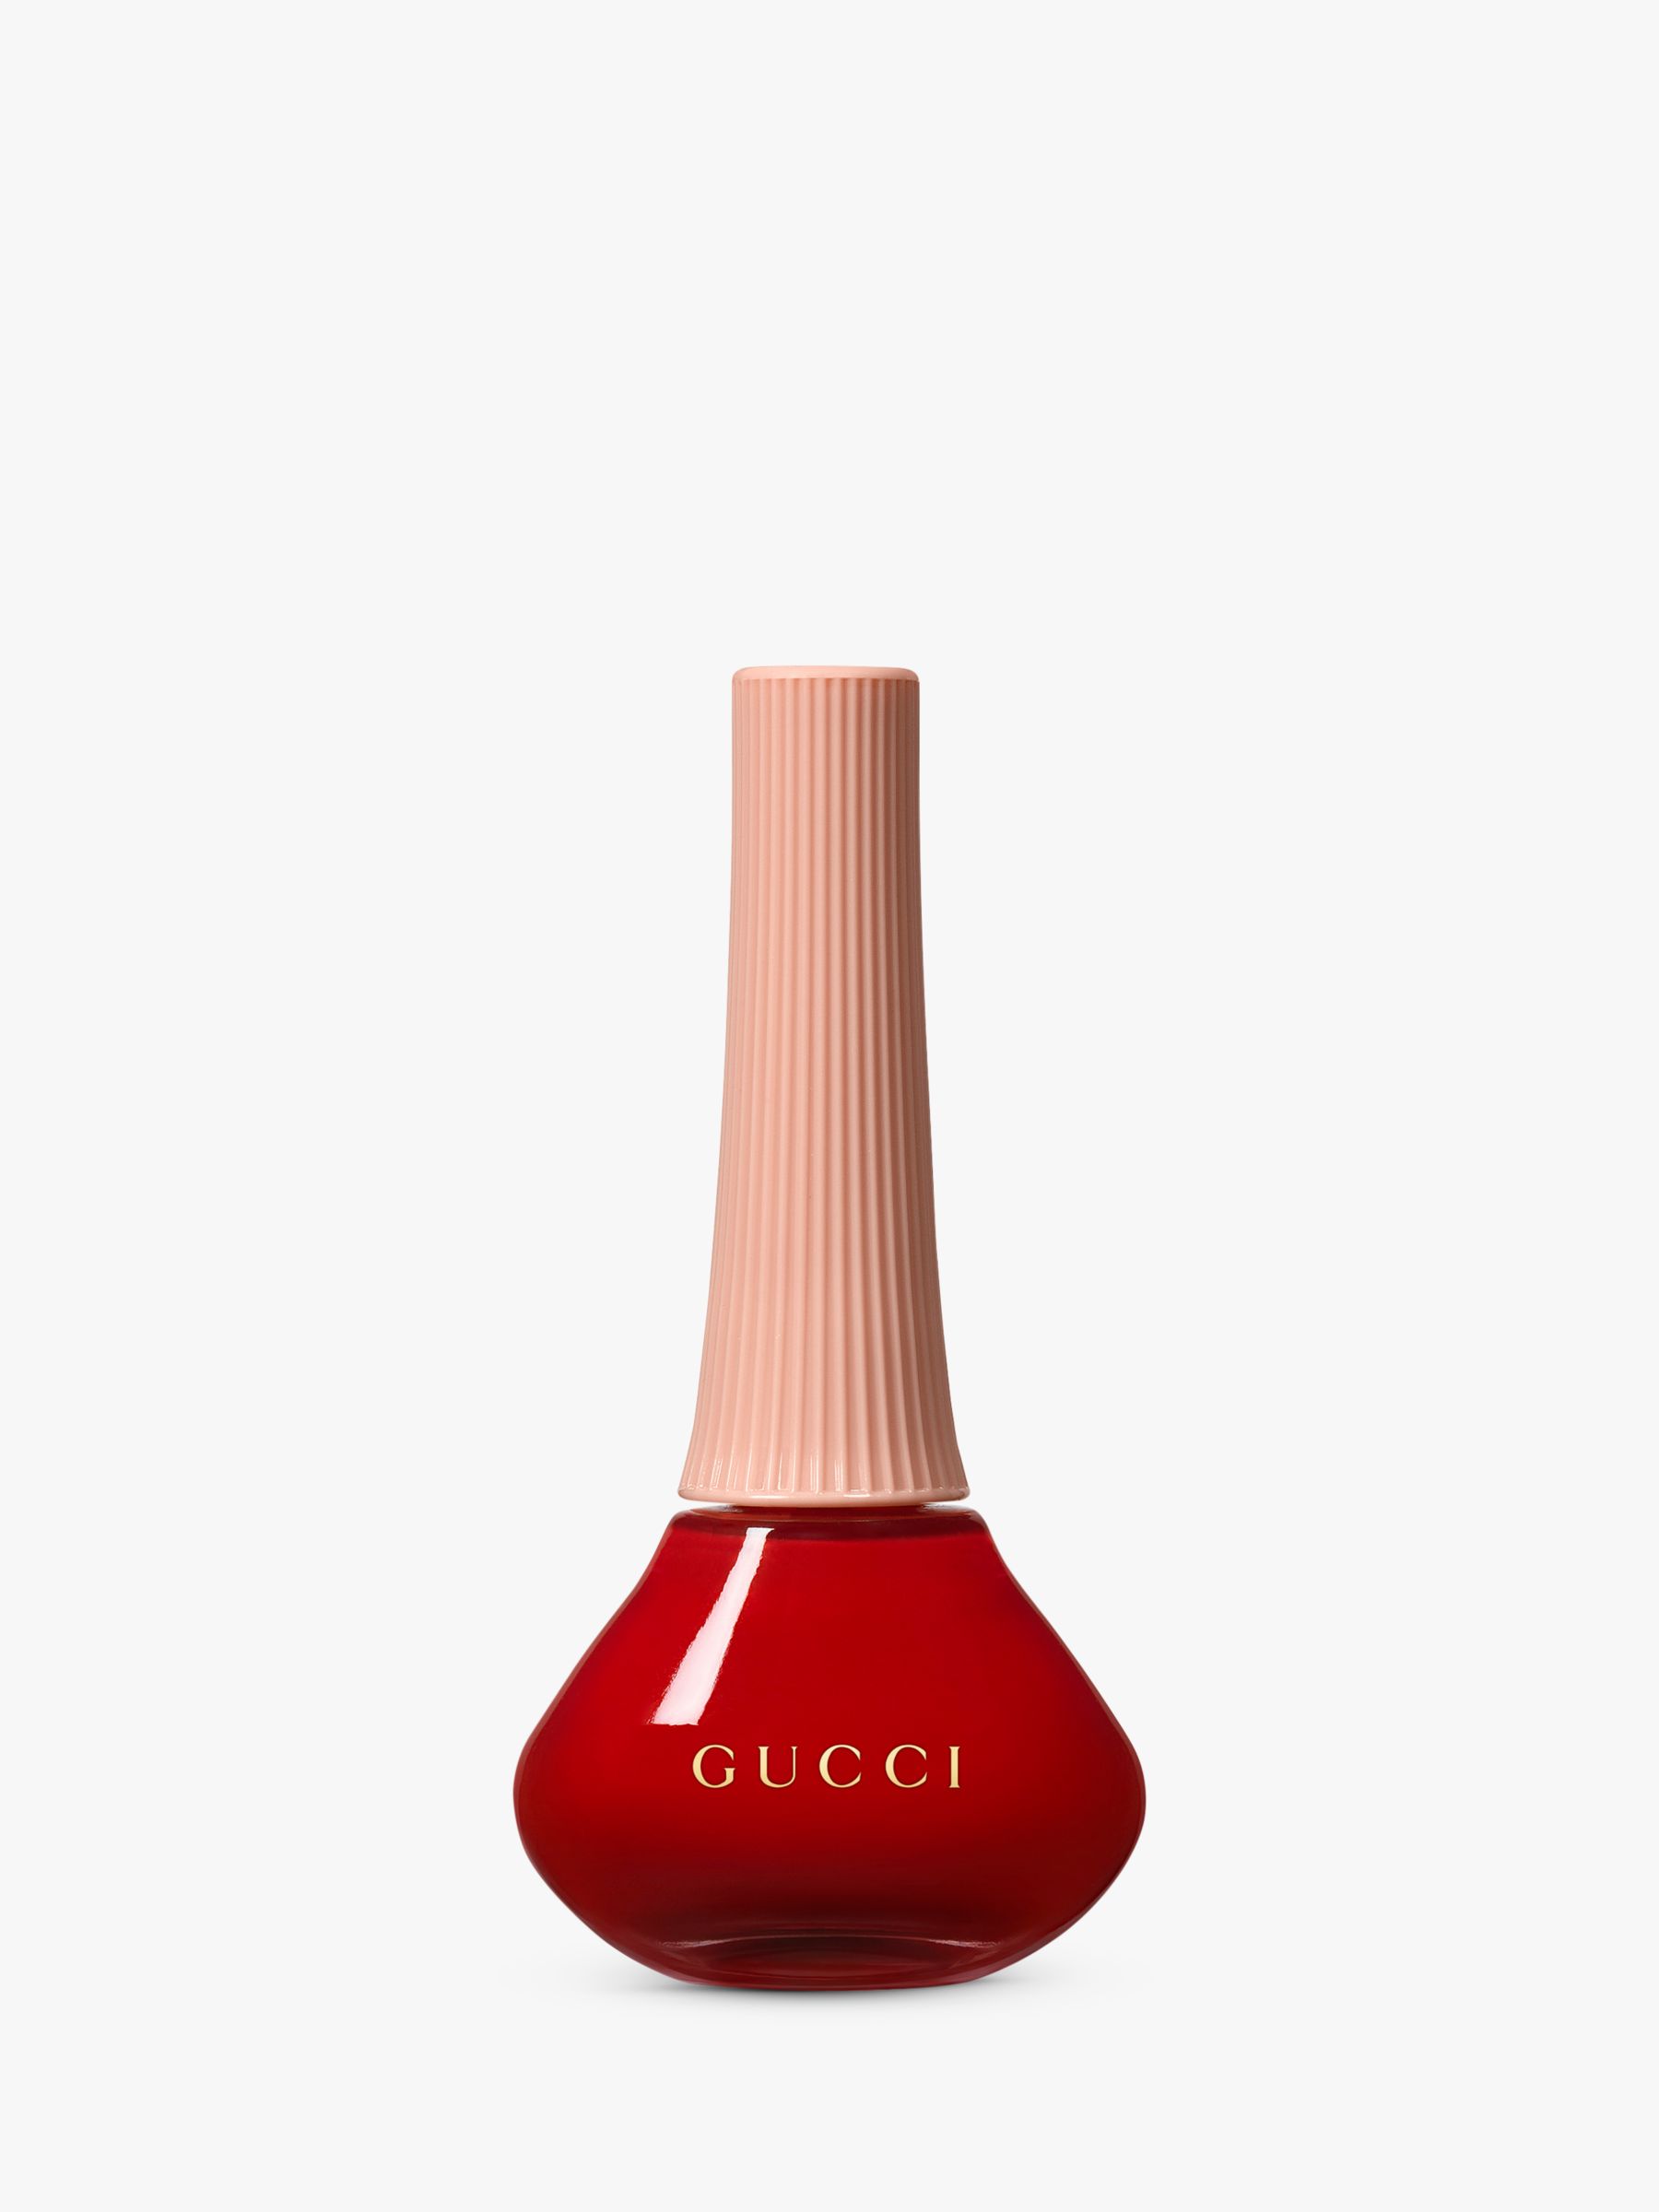 Gucci Vernis À Ongles Nail Polish, 025* Goldie Red 1